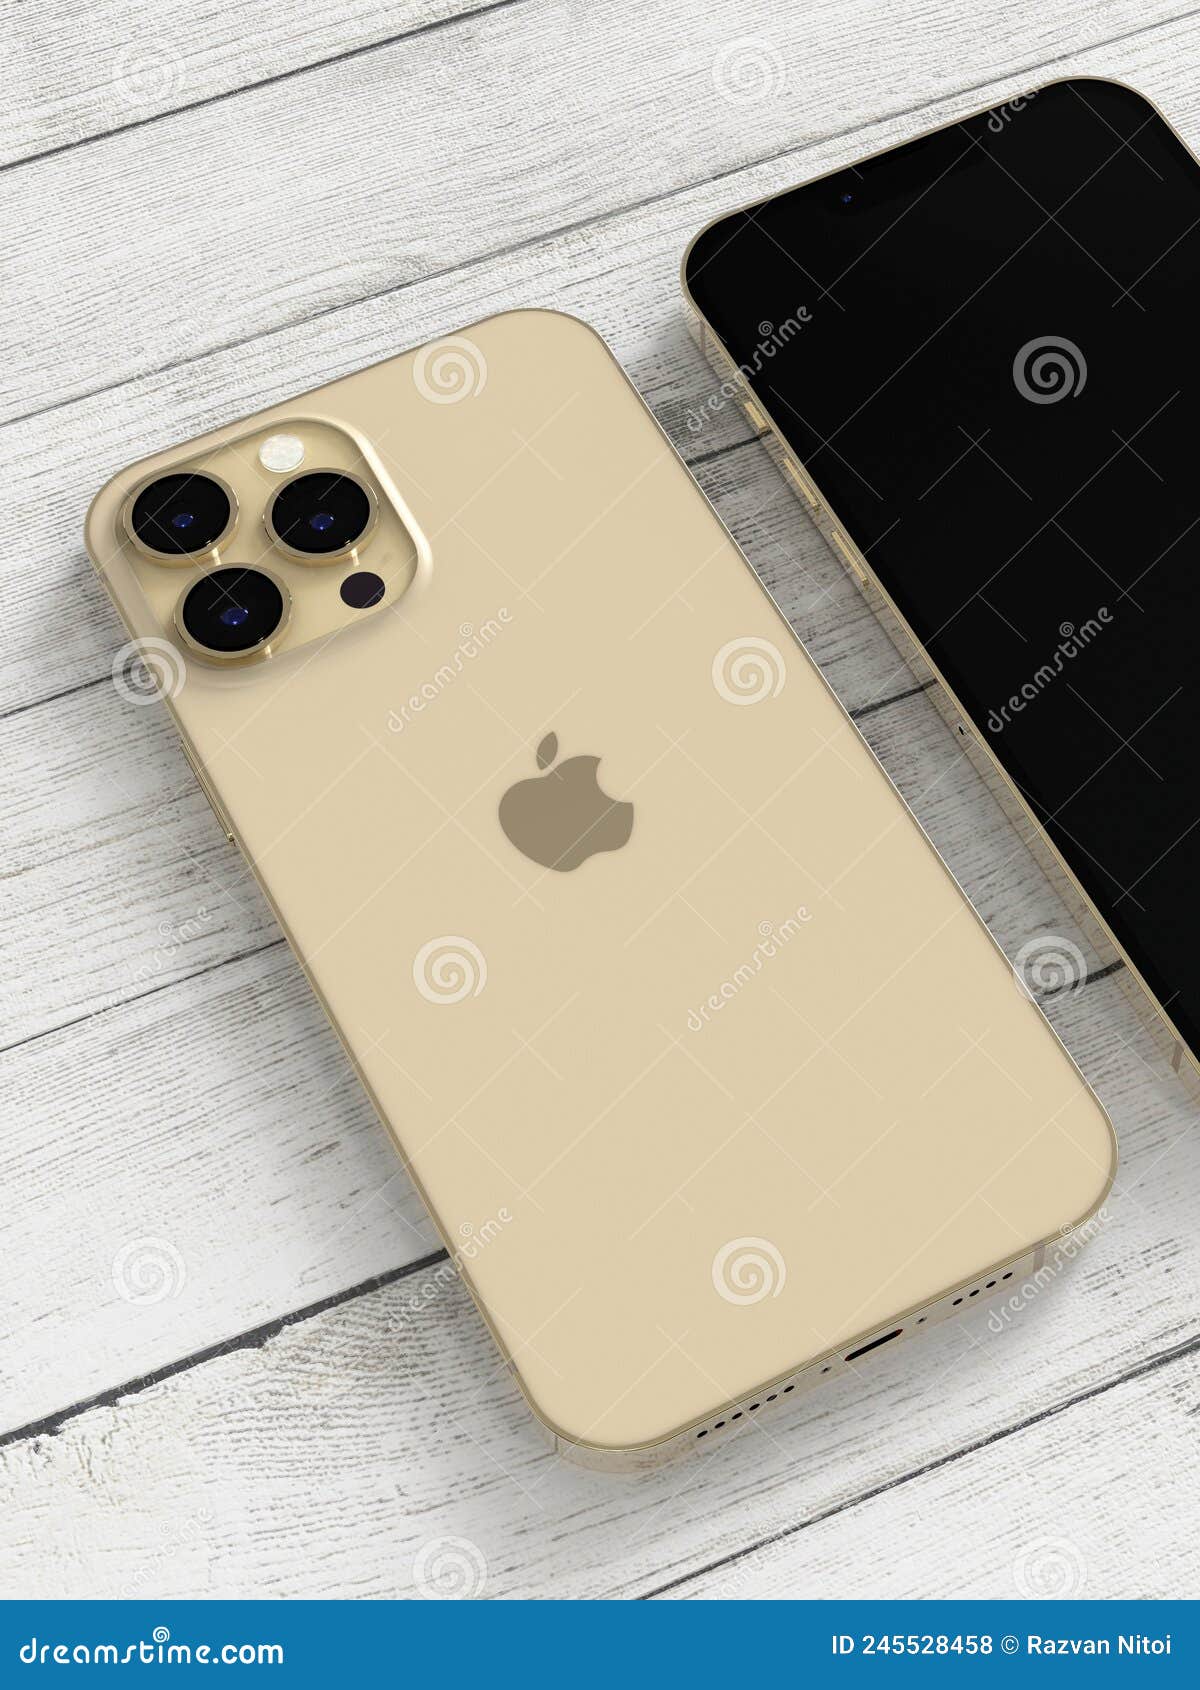 Apple IPhone 13 Pro Max Gold, Front and Back Sides Comparison Editorial  Stock Photo - Image of closeup, electronic: 245528458